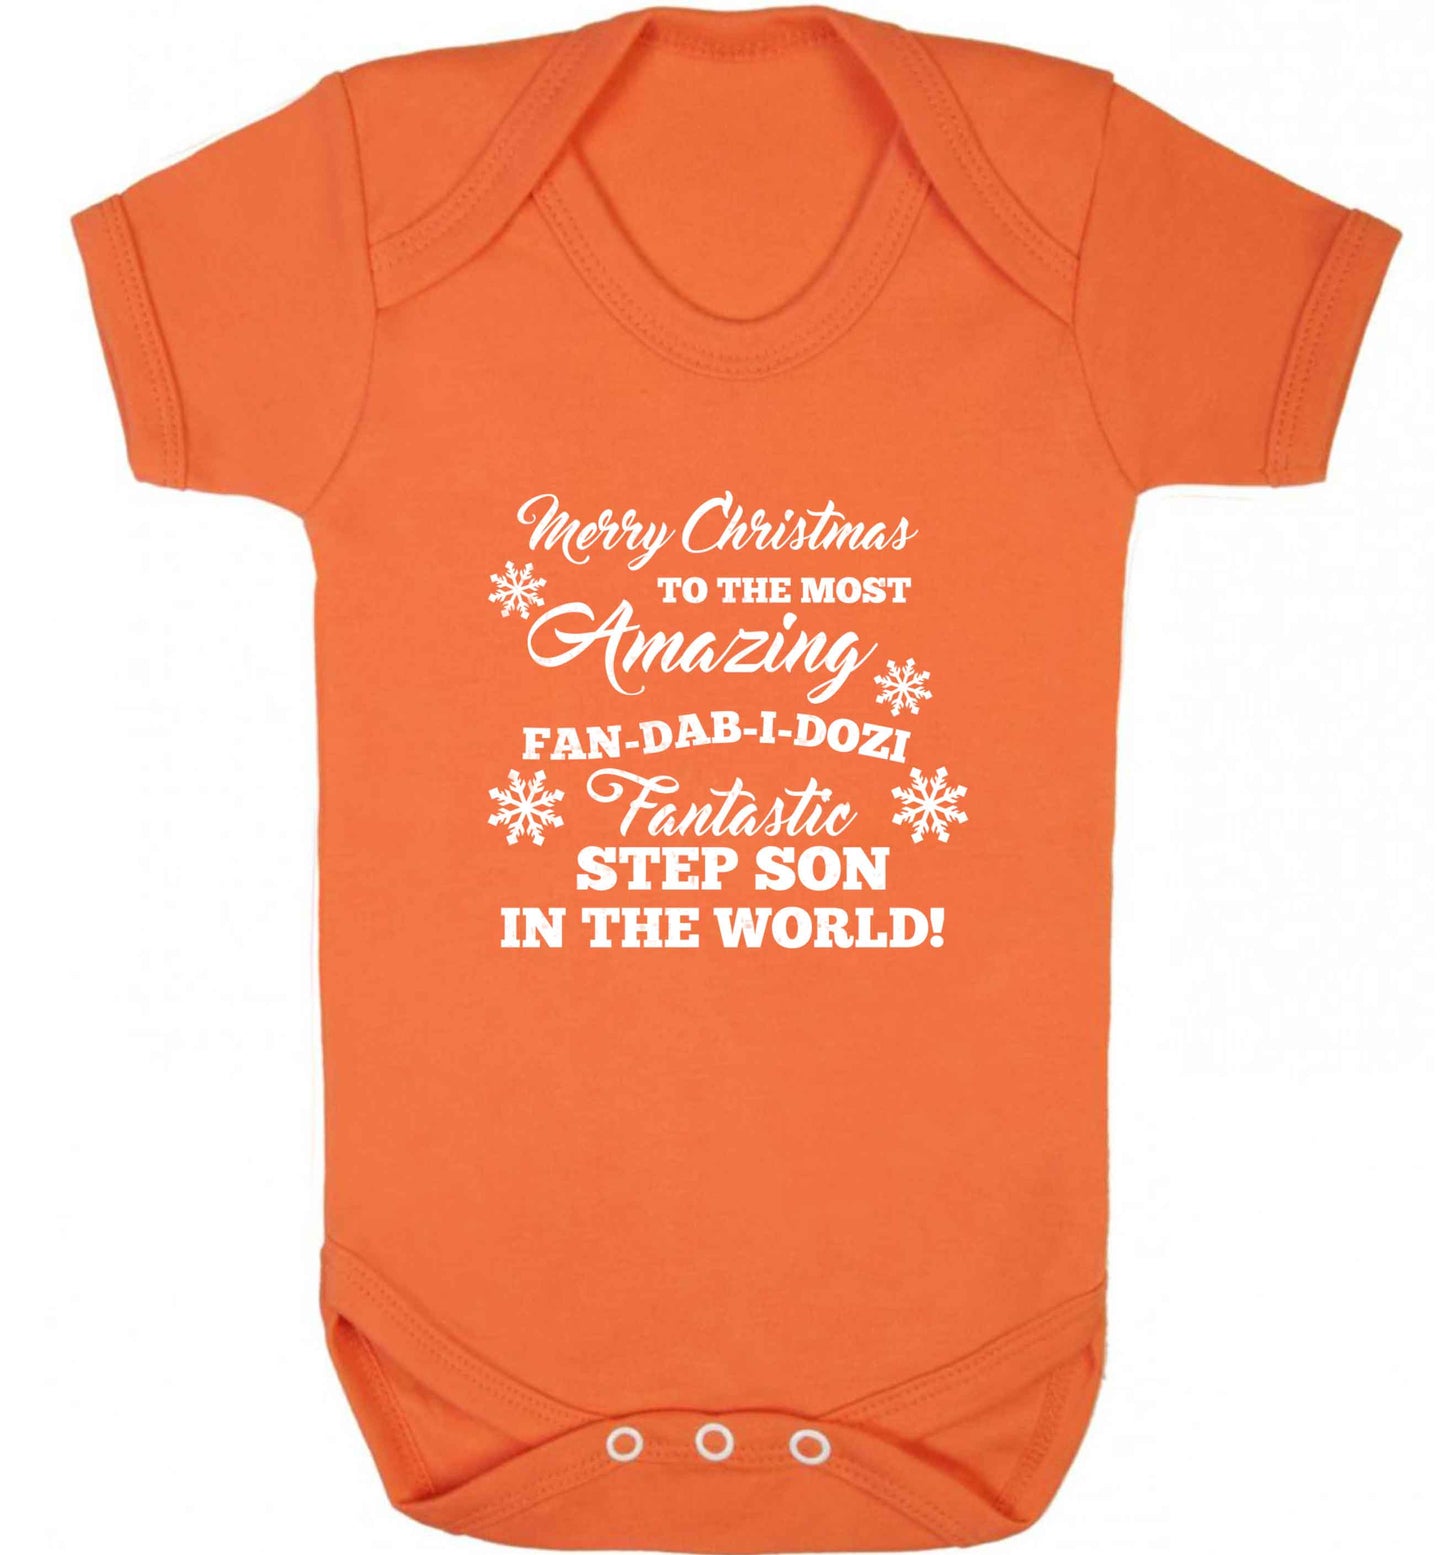 Merry Christmas to the most amazing fan-dab-i-dozi fantasic Step Son in the world baby vest orange 18-24 months